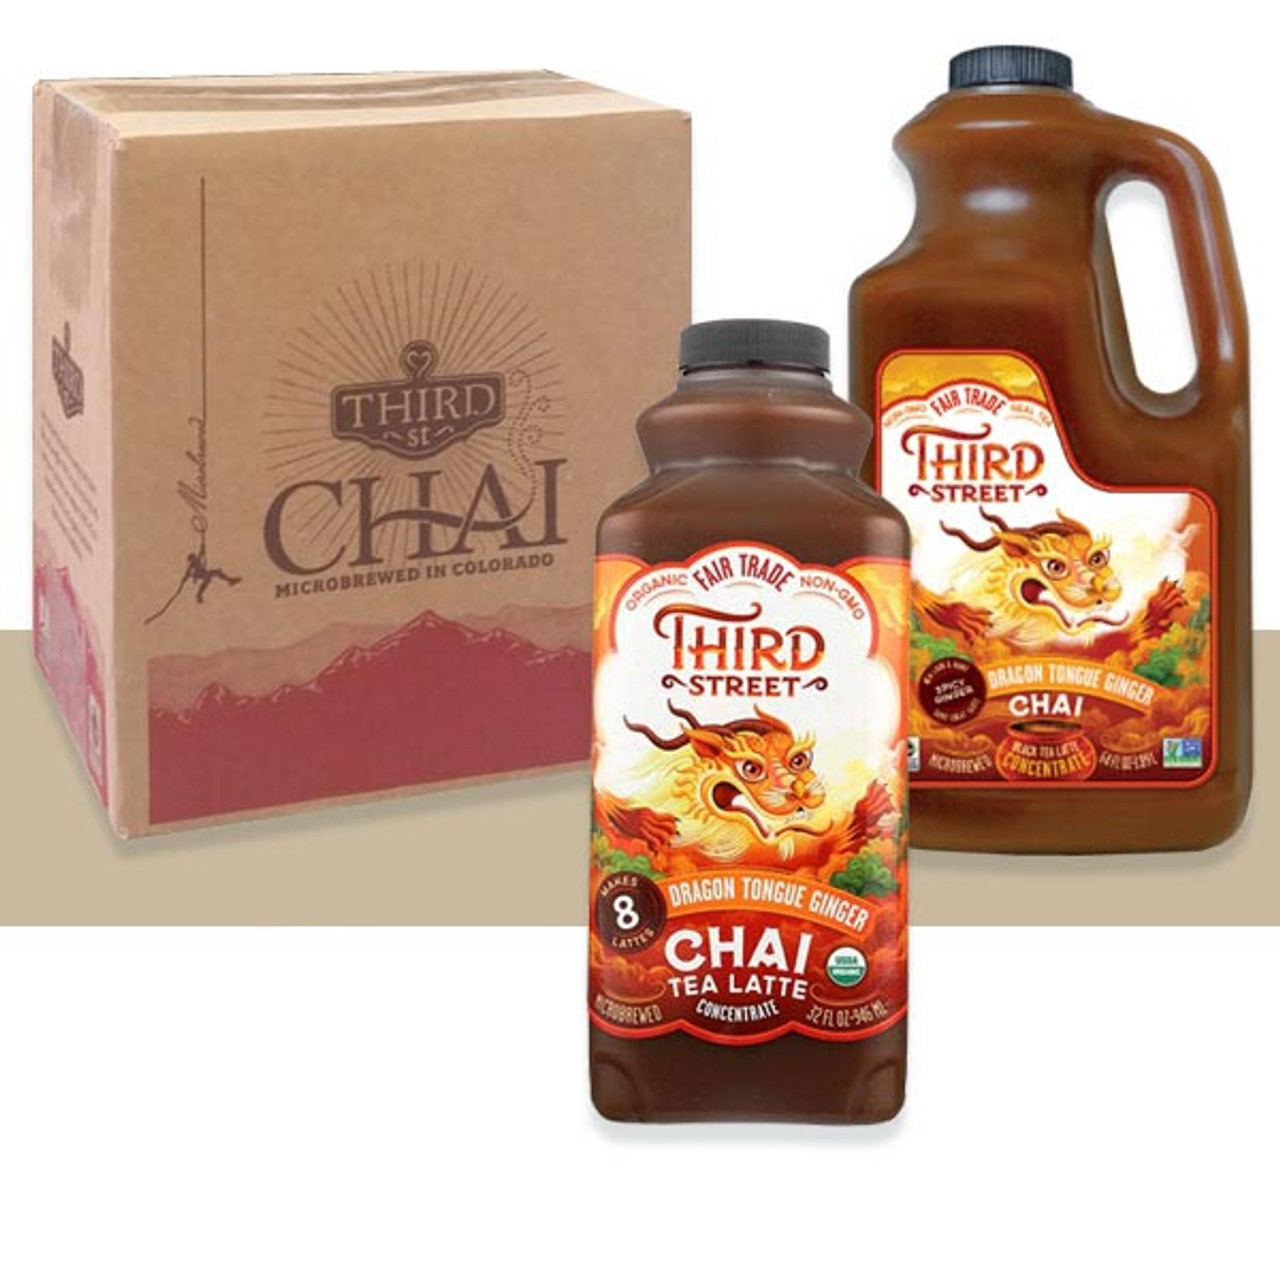 Best Chai Concentrate In Portland, OR - Tanglewood Beverage Co